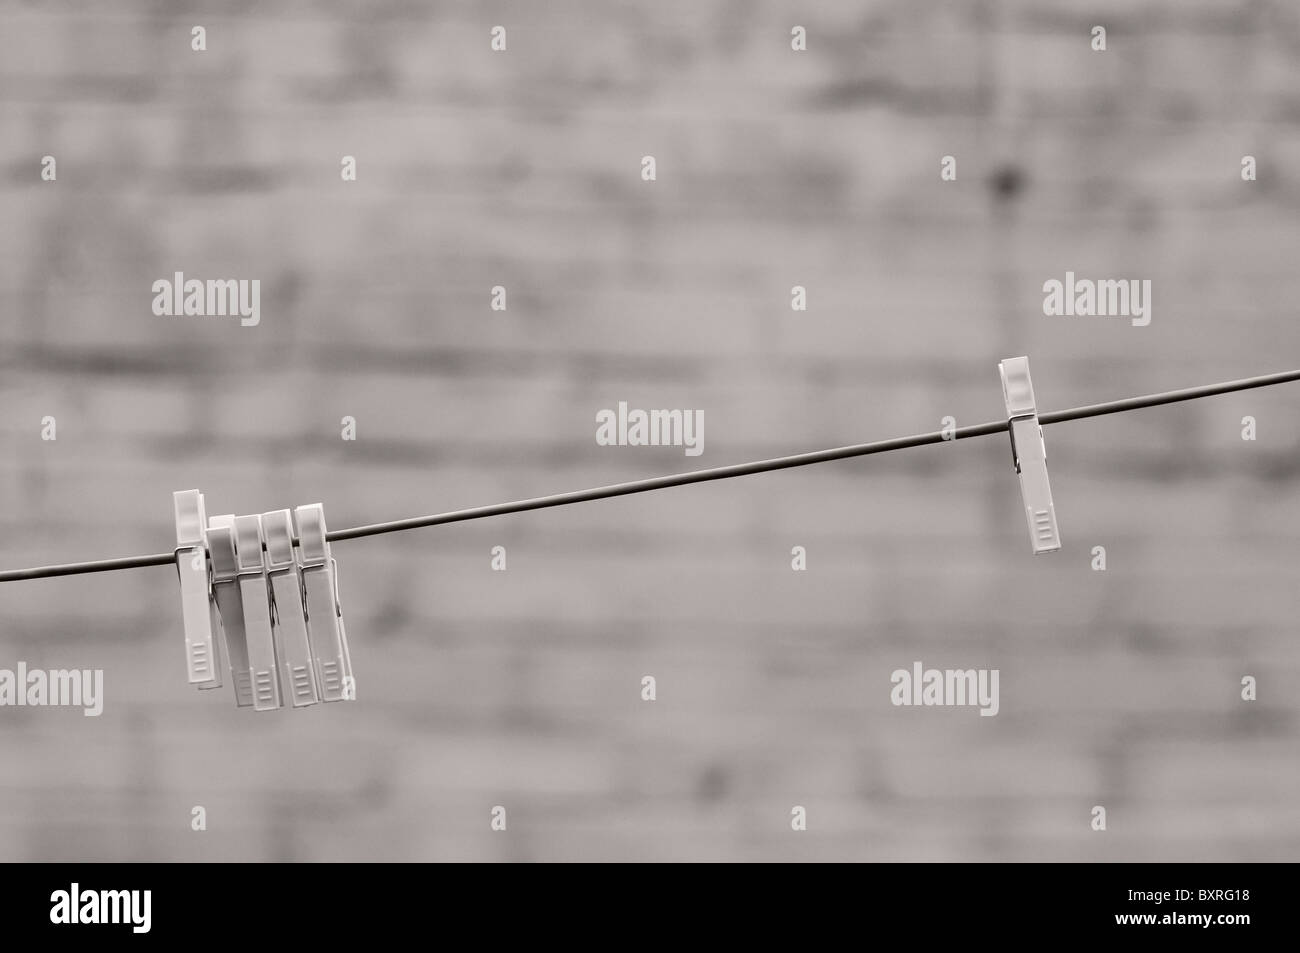 Plastic clothes pegs on washing line. Stock Photo